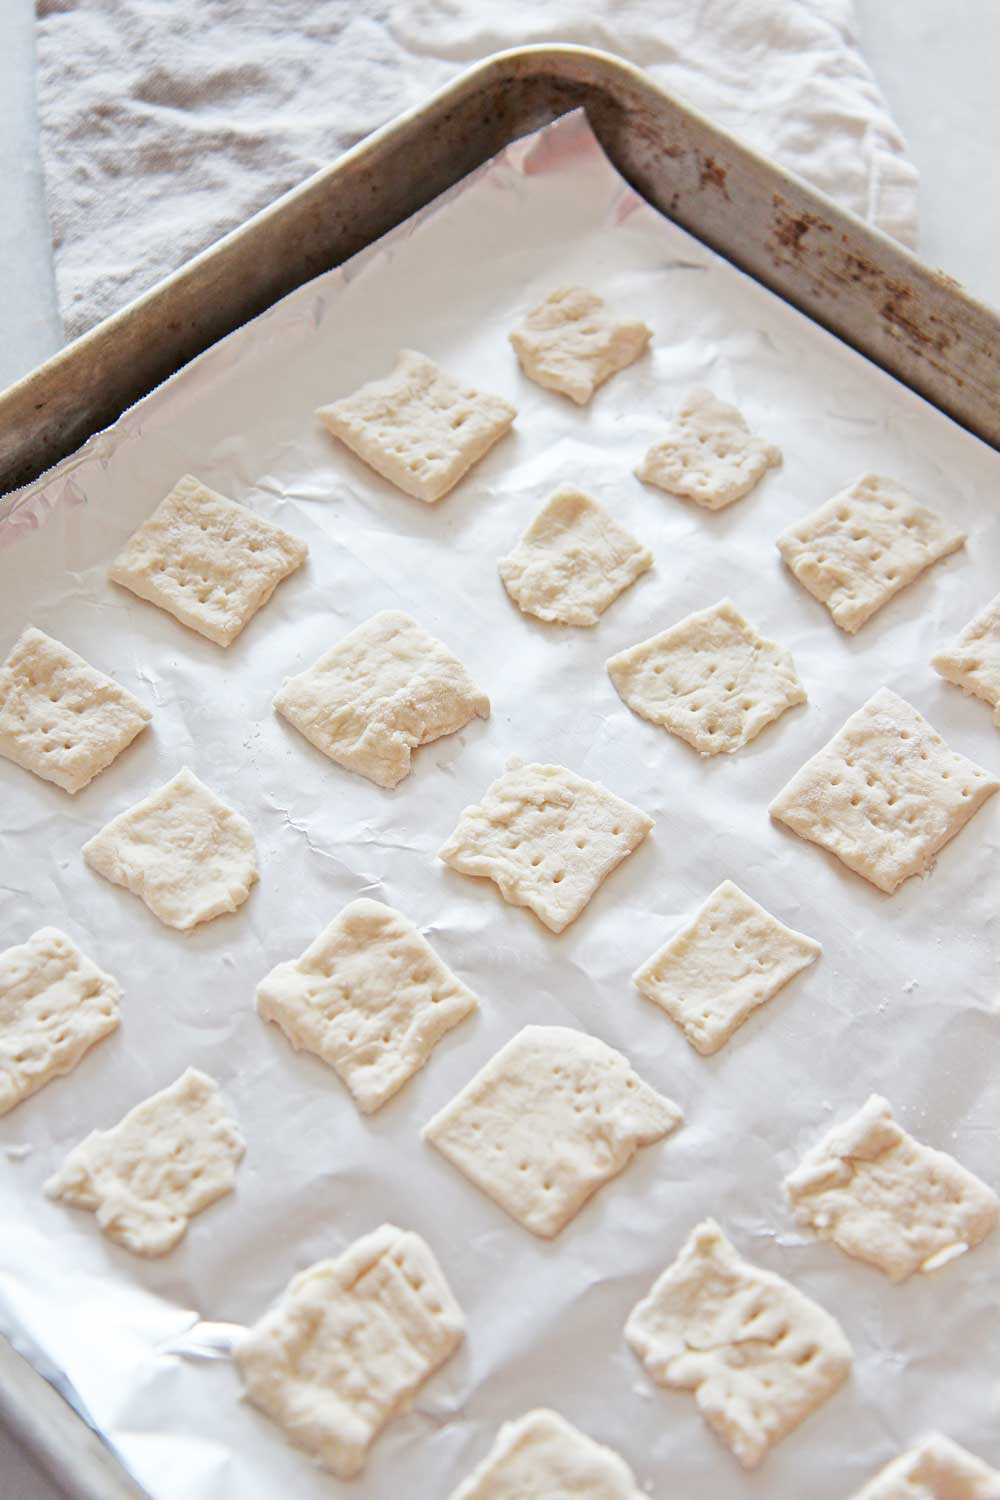 3 Ingredient Homemade Crackers Recipe. Greek yogurt, flour, and garlic salt is all you need for this homemade recipe. It takes 10 minutes in the oven and is carb happiness. Happy Cooking! www.Chophappy.com #homemadecrackers #crackersrecipe